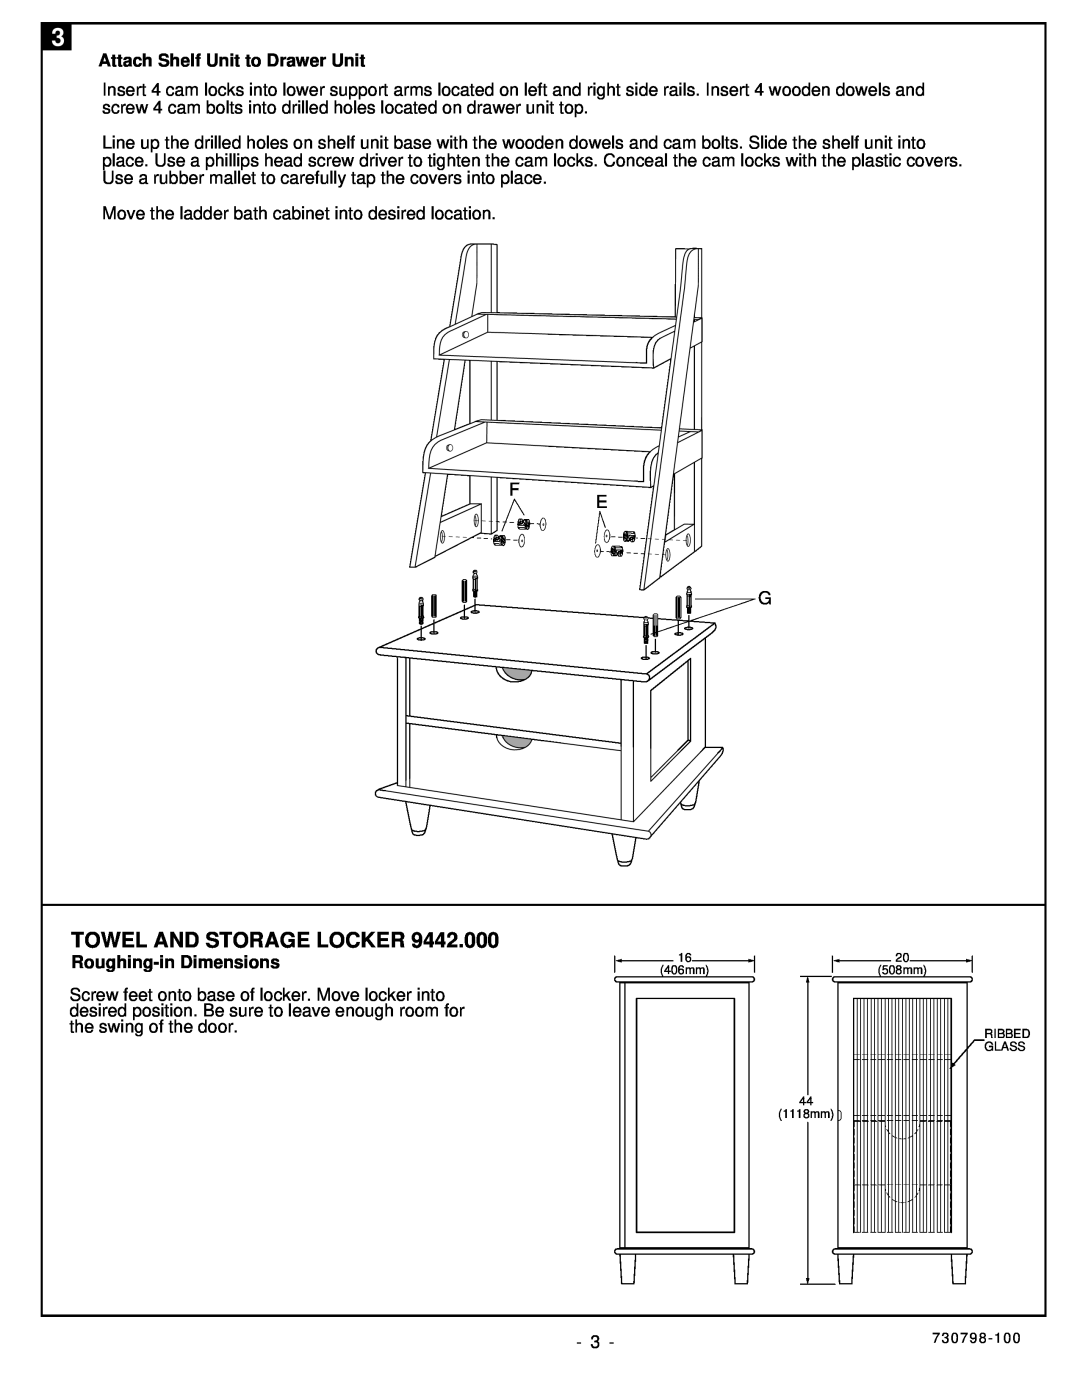 American Standard 730733-0200A, 9442.000 Towel And Storage Locker, Attach Shelf Unit to Drawer Unit, Roughing-inDimensions 